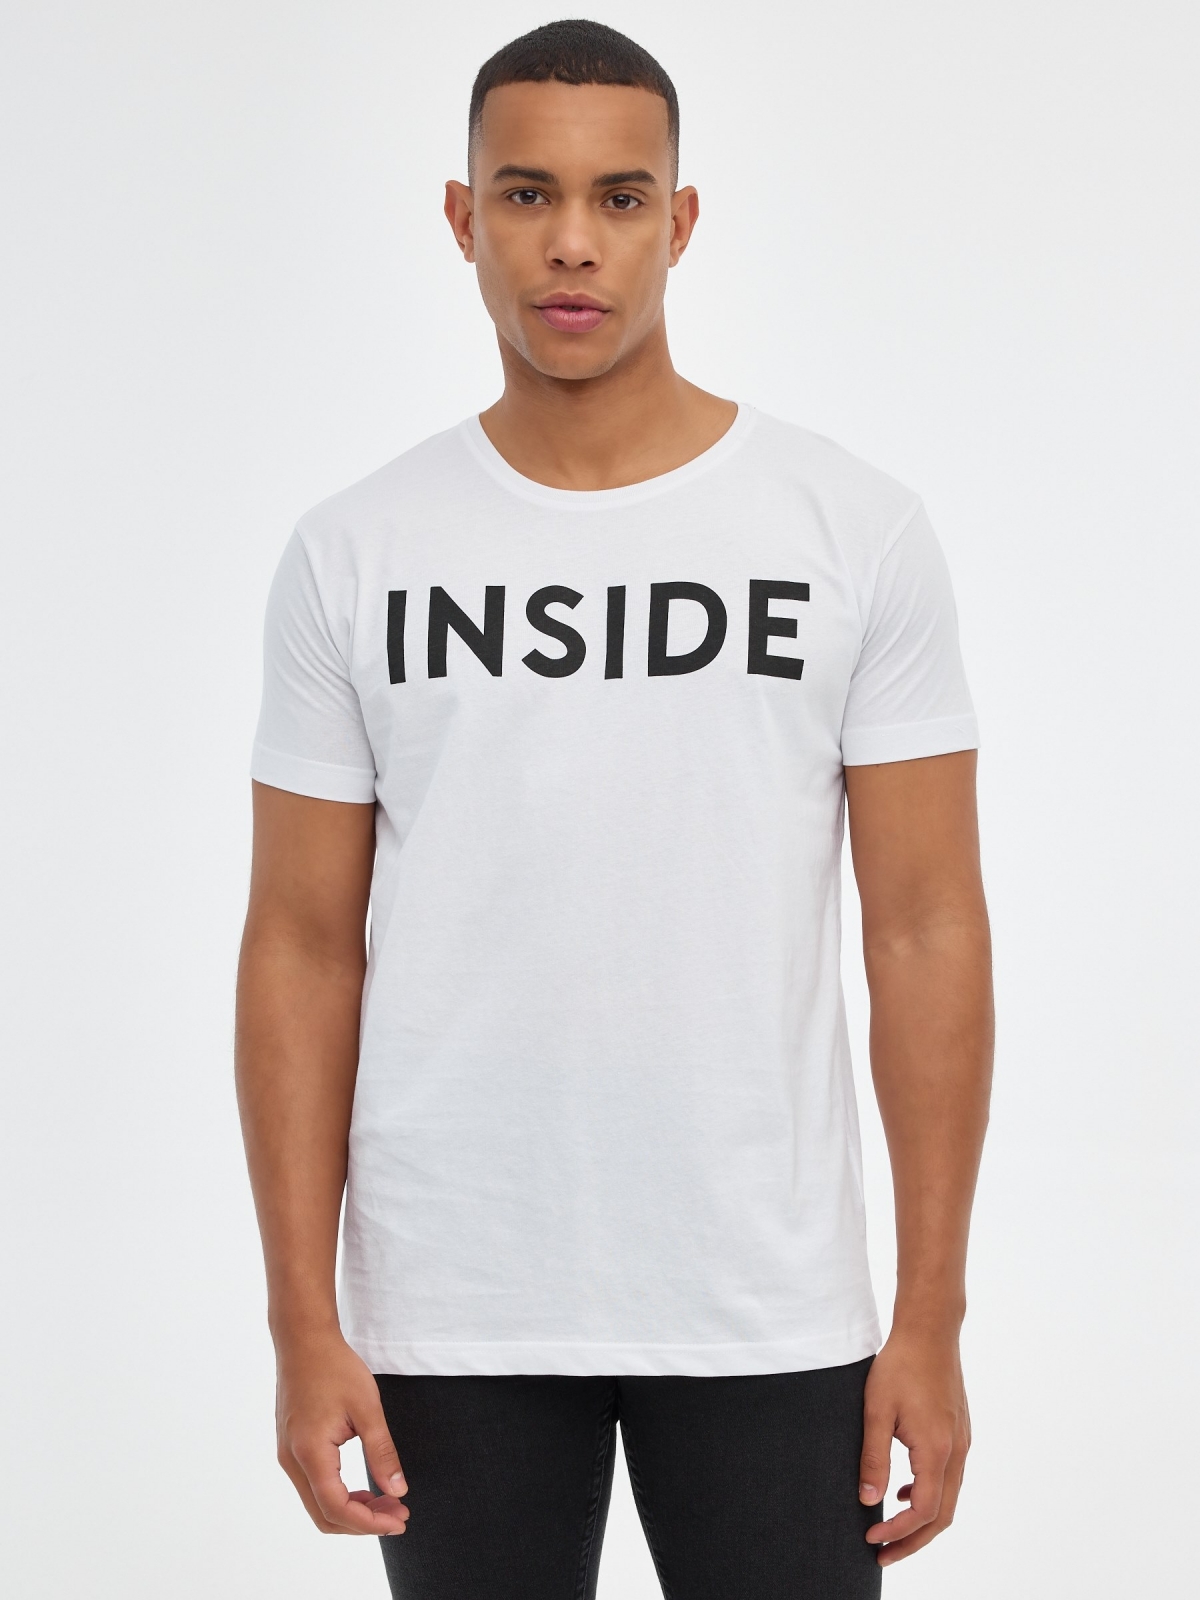 INSIDE basic T-shirt white middle front view